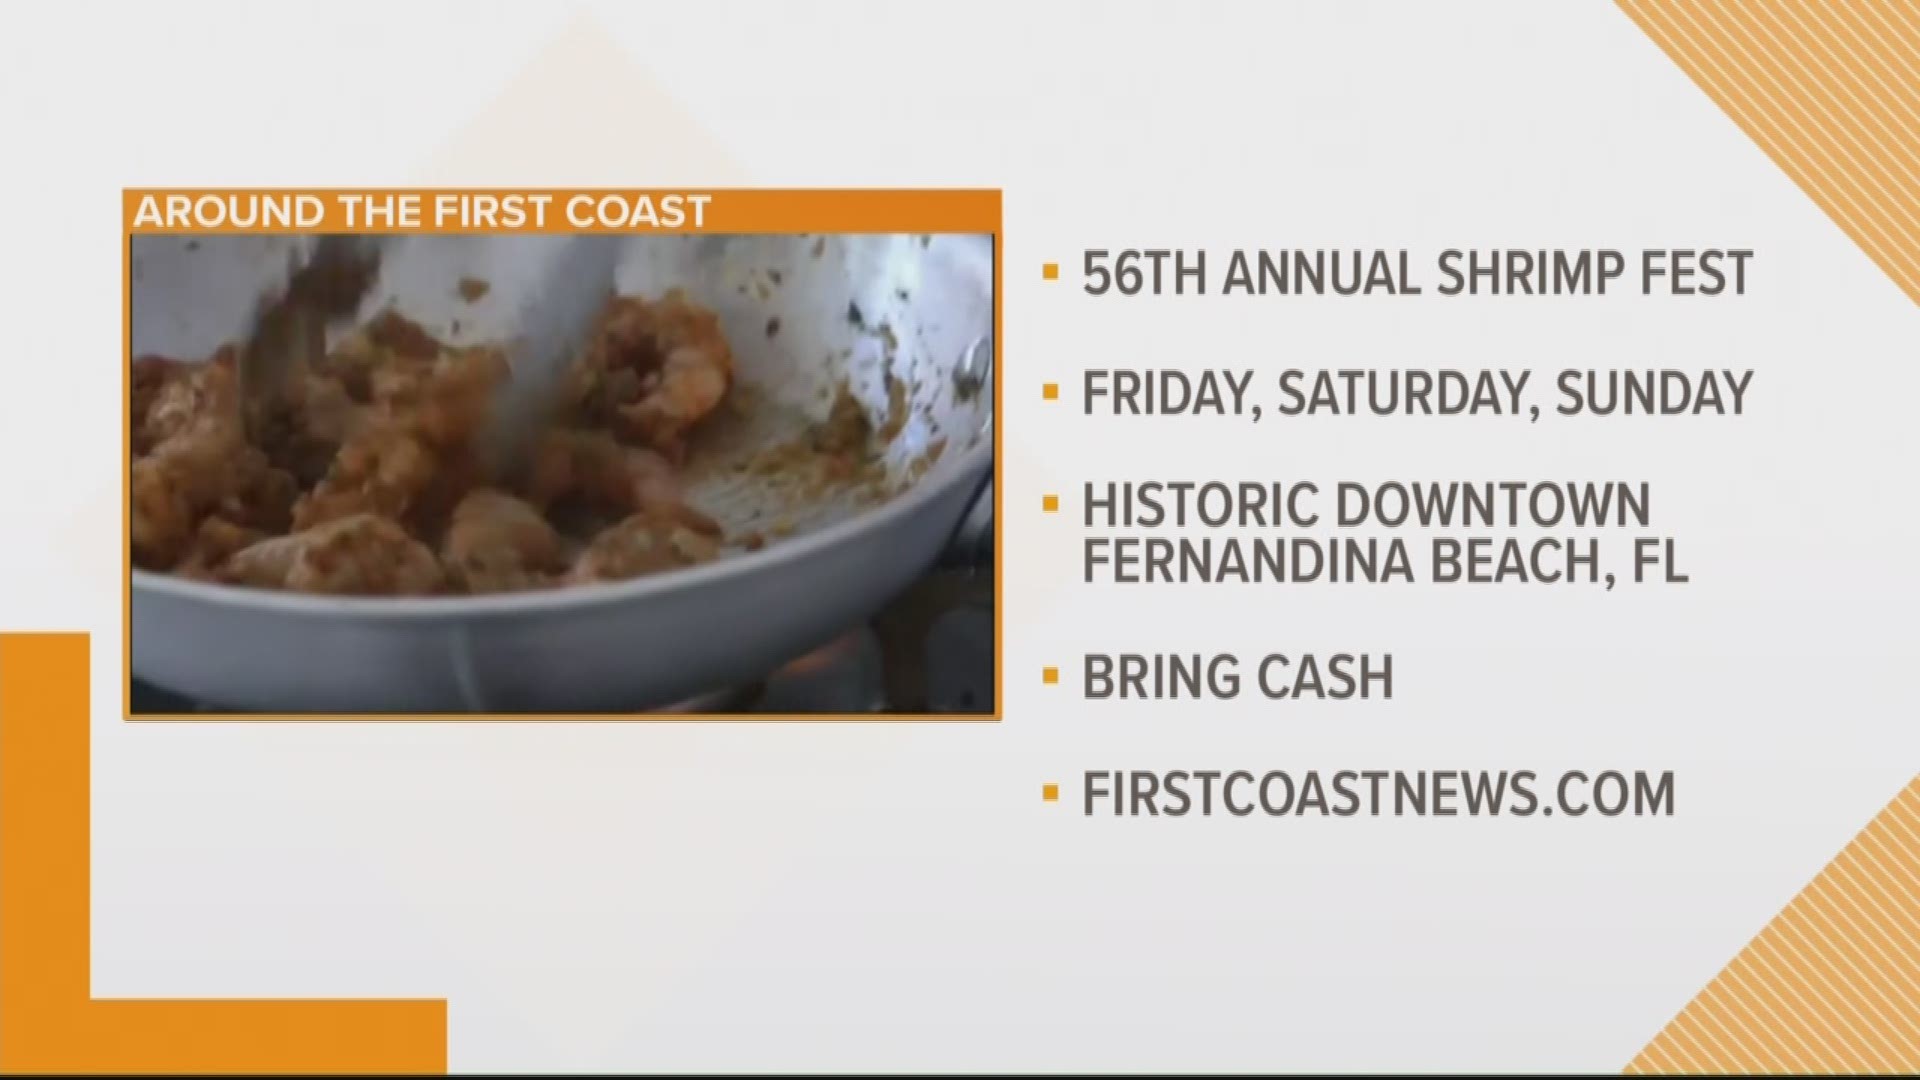 Shrimp festival, Rockville and so much more! Here's whats happening this weekend on the First Coast.